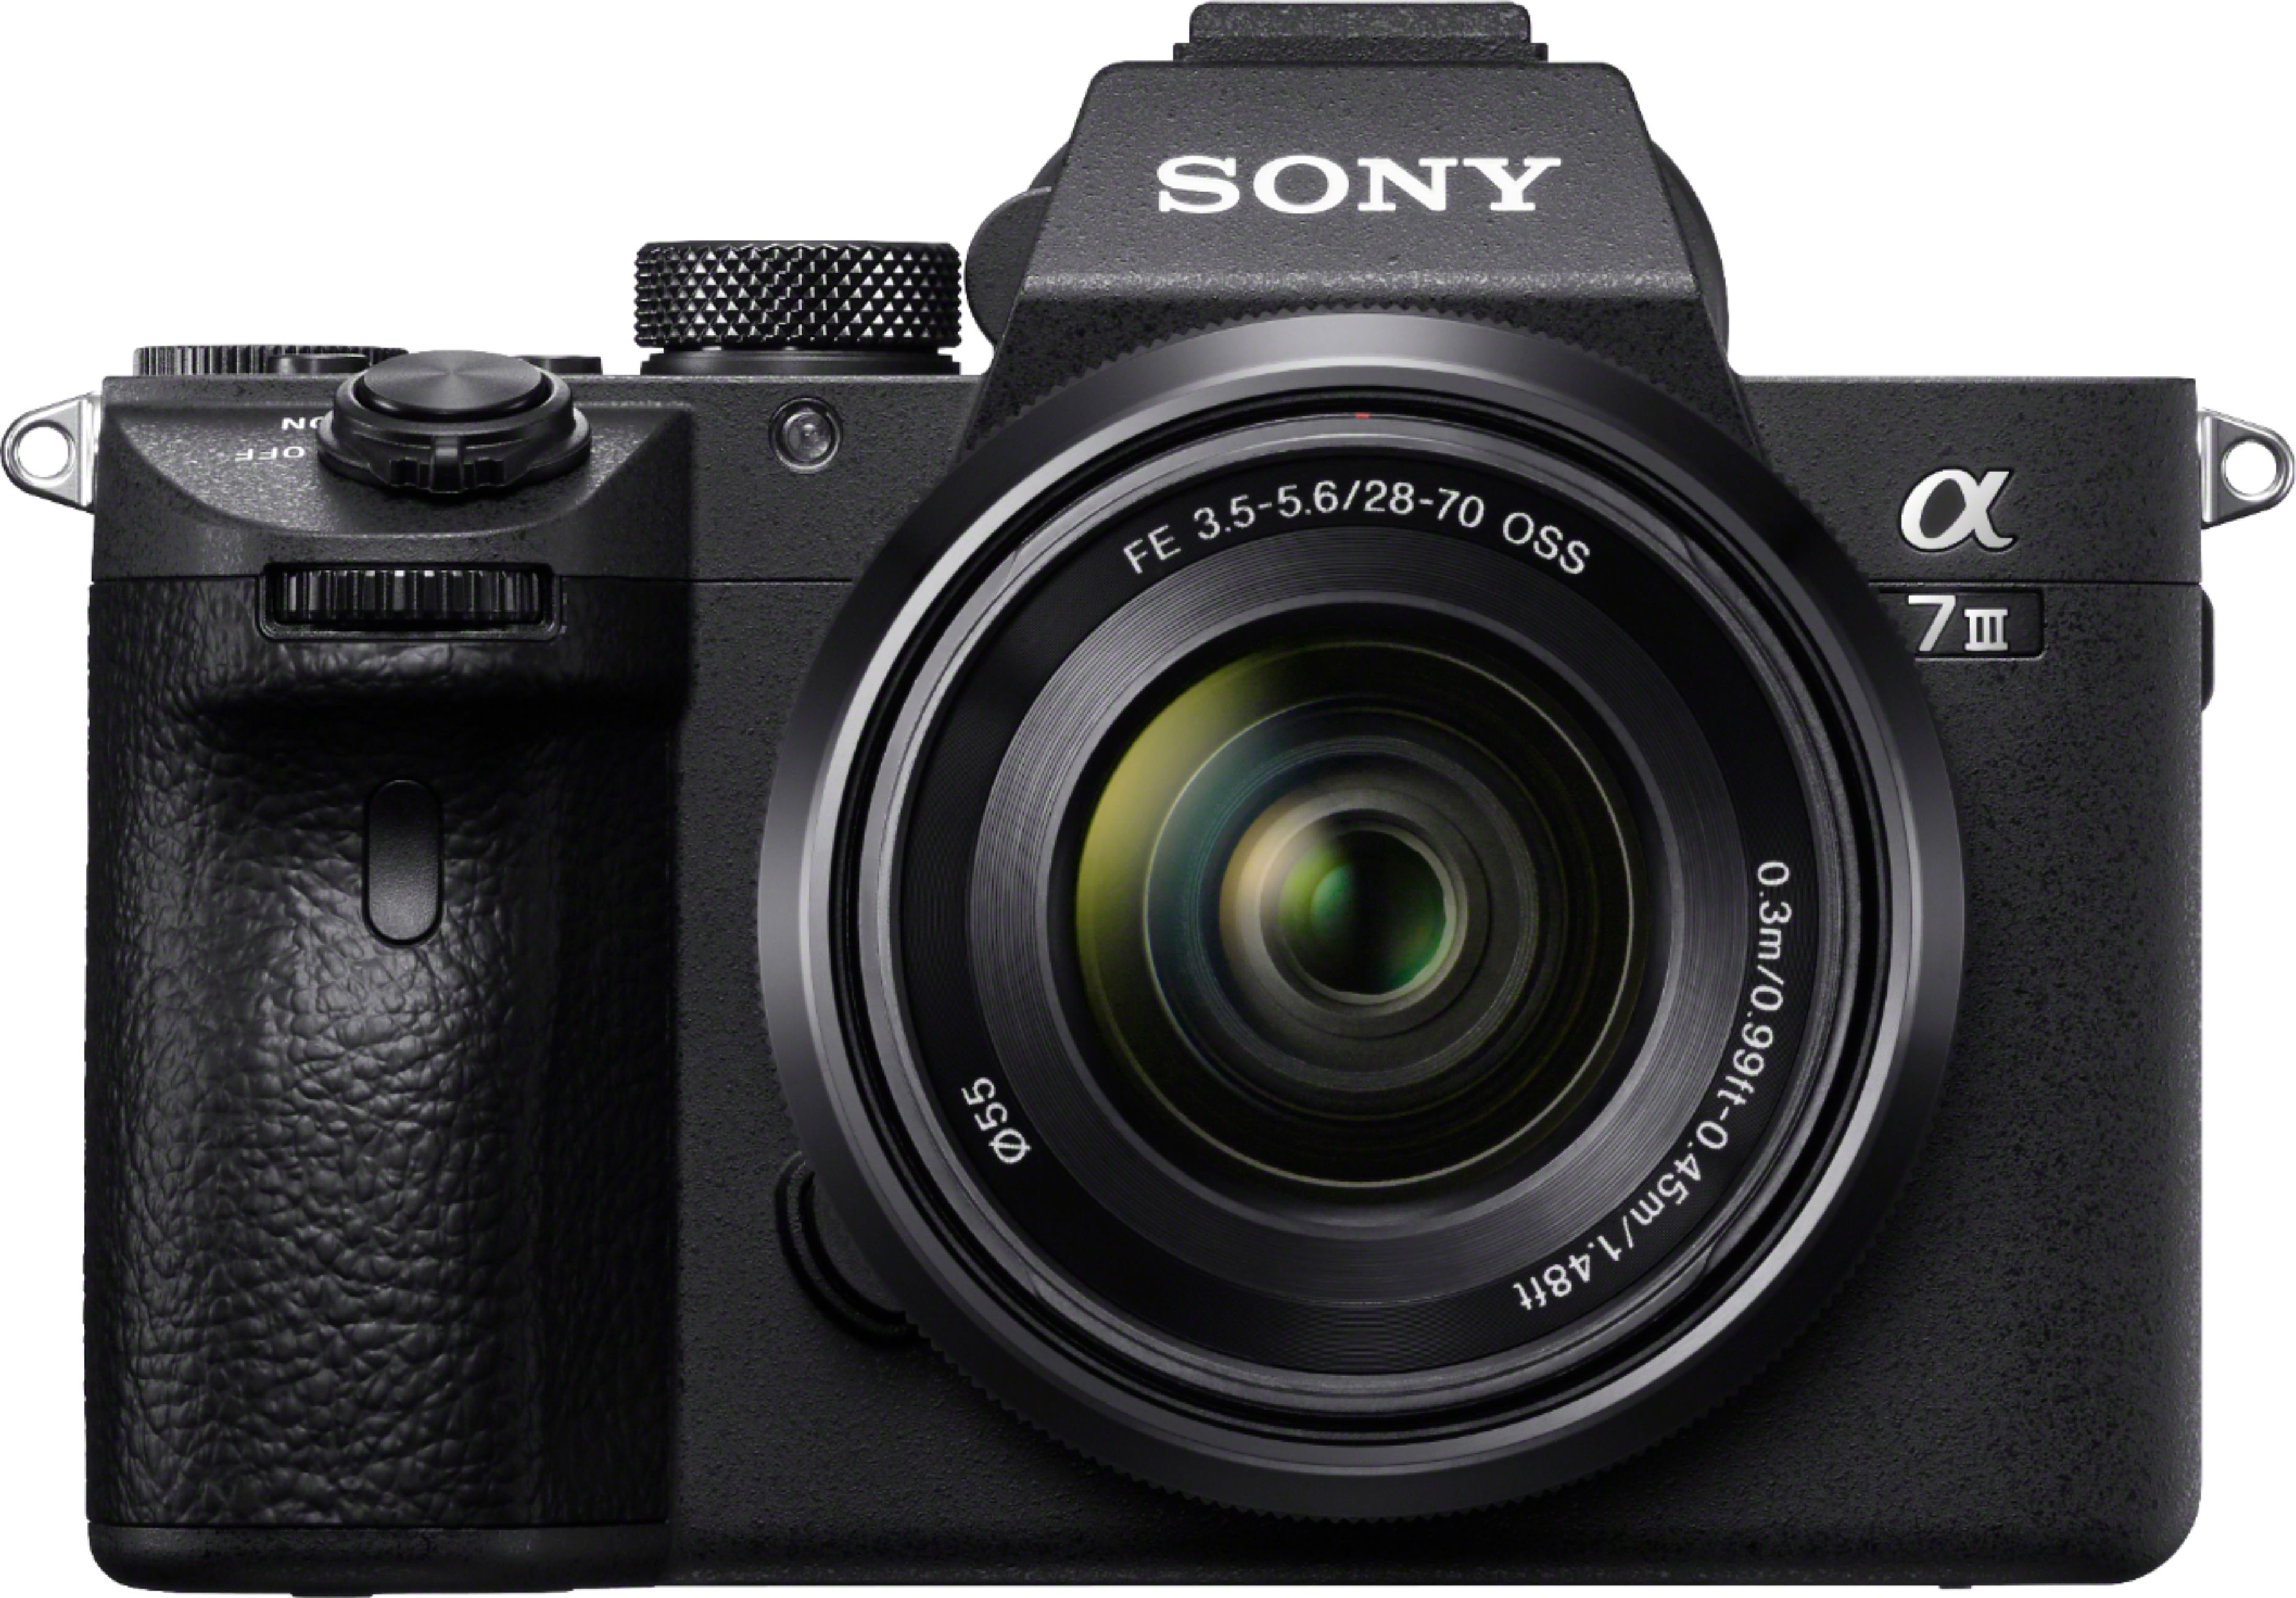 Sony Alpha a7 III Mirrorless [Video] Camera with FE 28-70 mm F3.5 